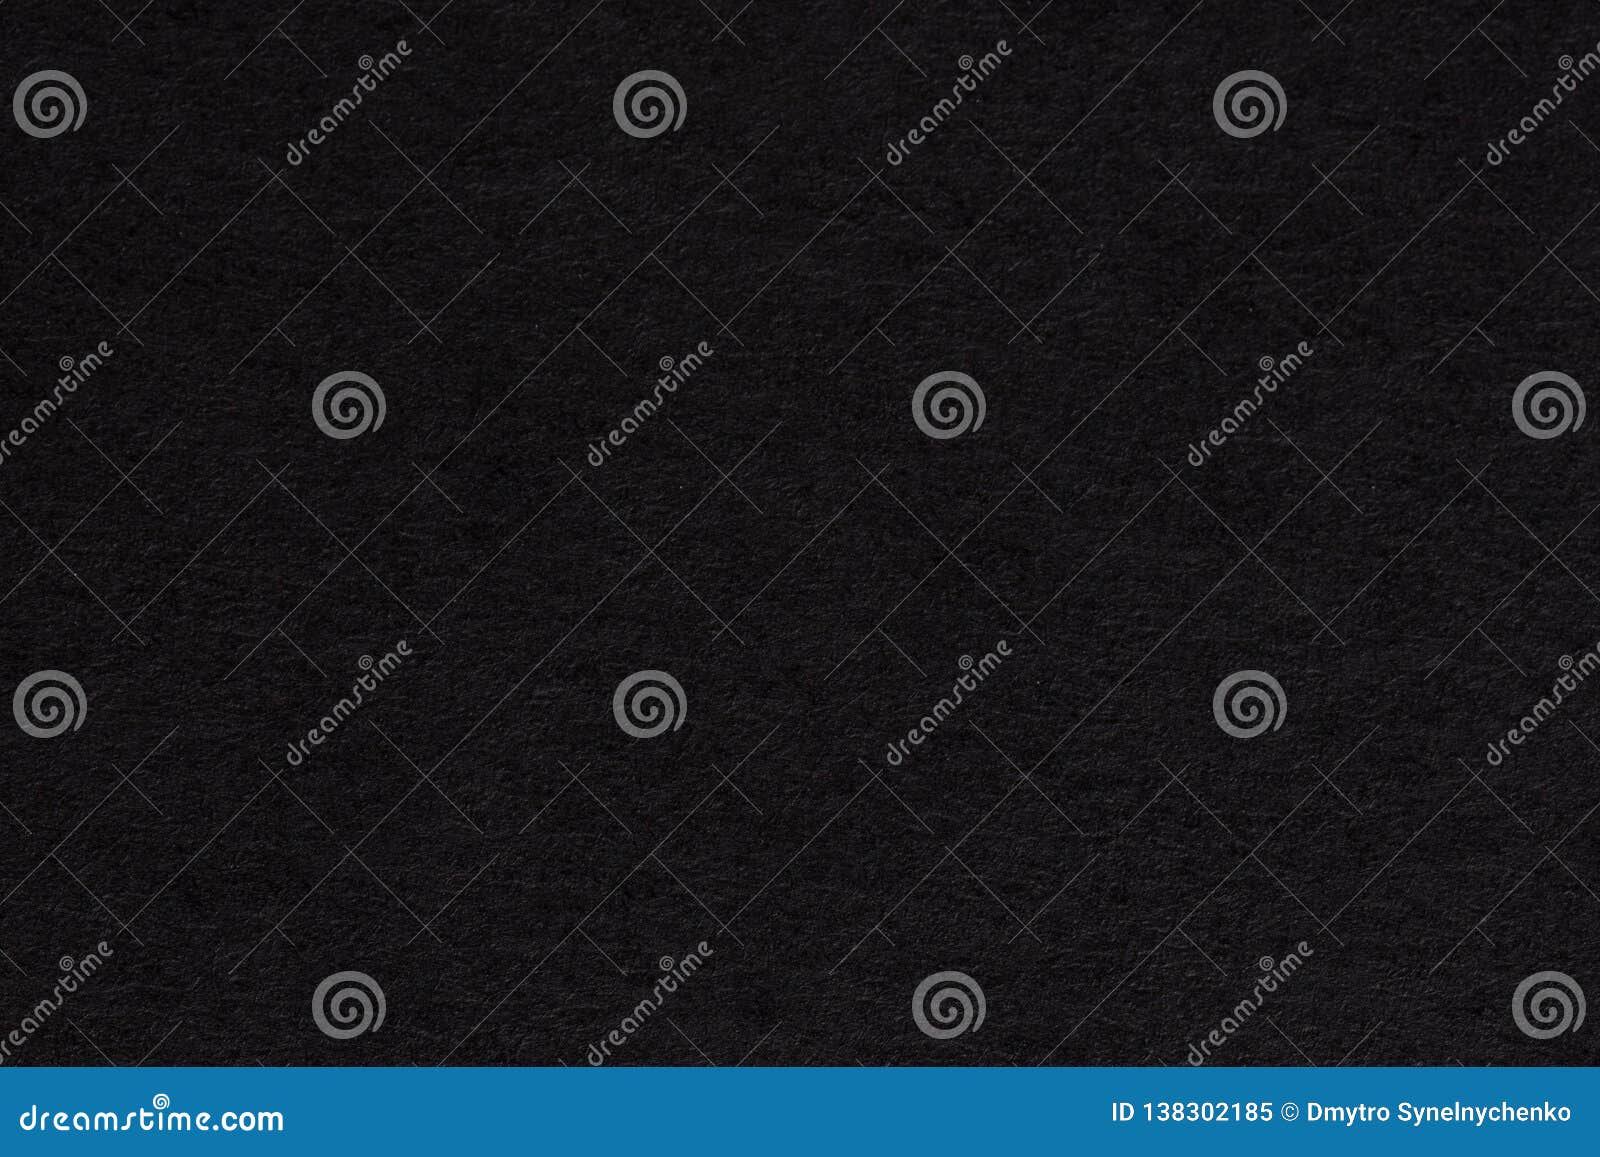 Black Dark Background of Texture for Your Unique Project. Stock Image ...